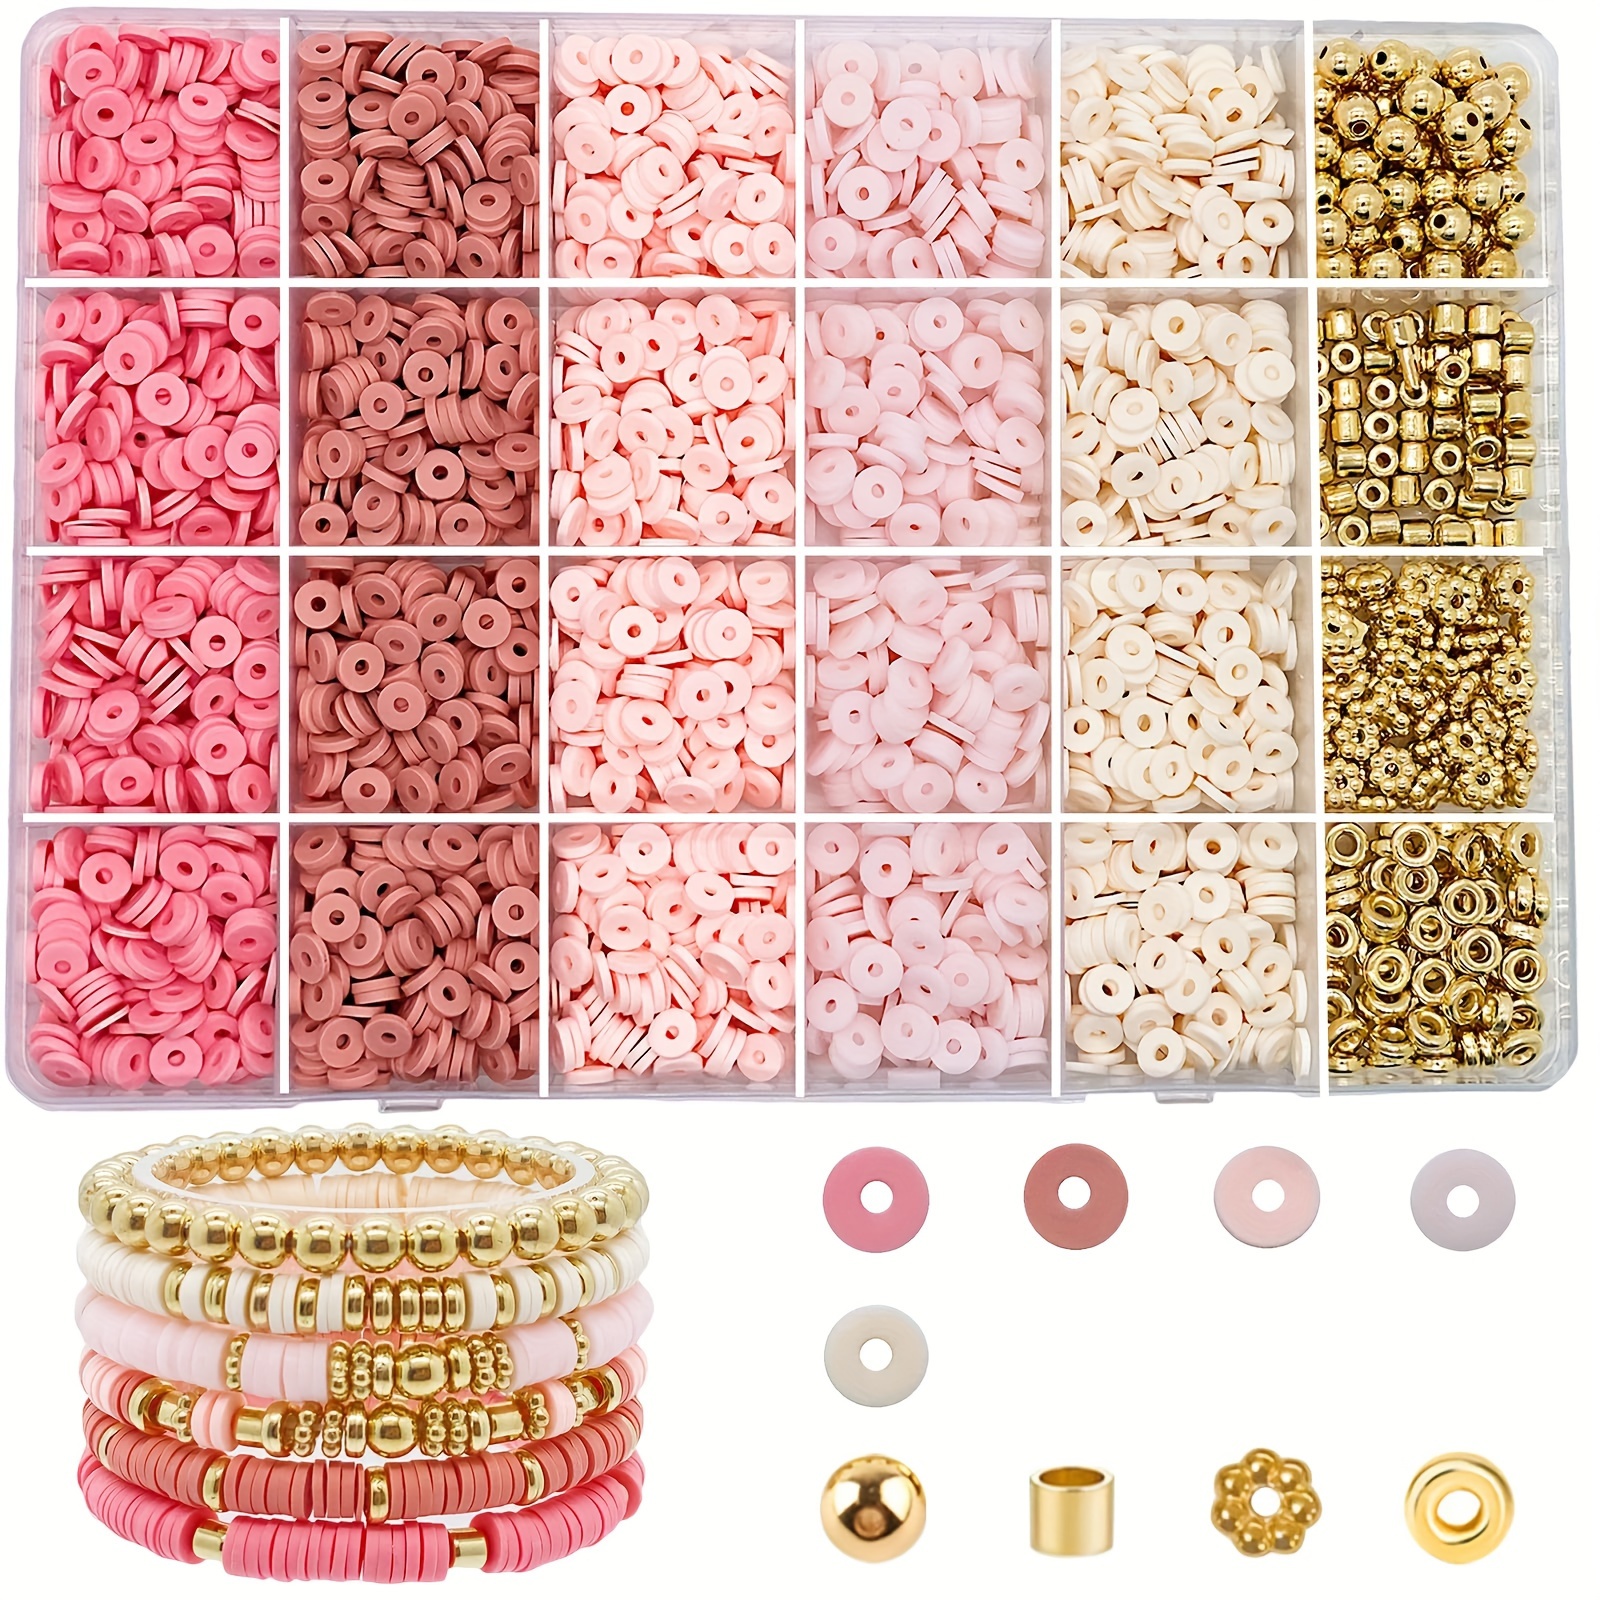 3300Pcs Earring Posts And Backs,Earring Making Supplies And Earring Backs  For Studs For DIY Earrings And Jewelry Making